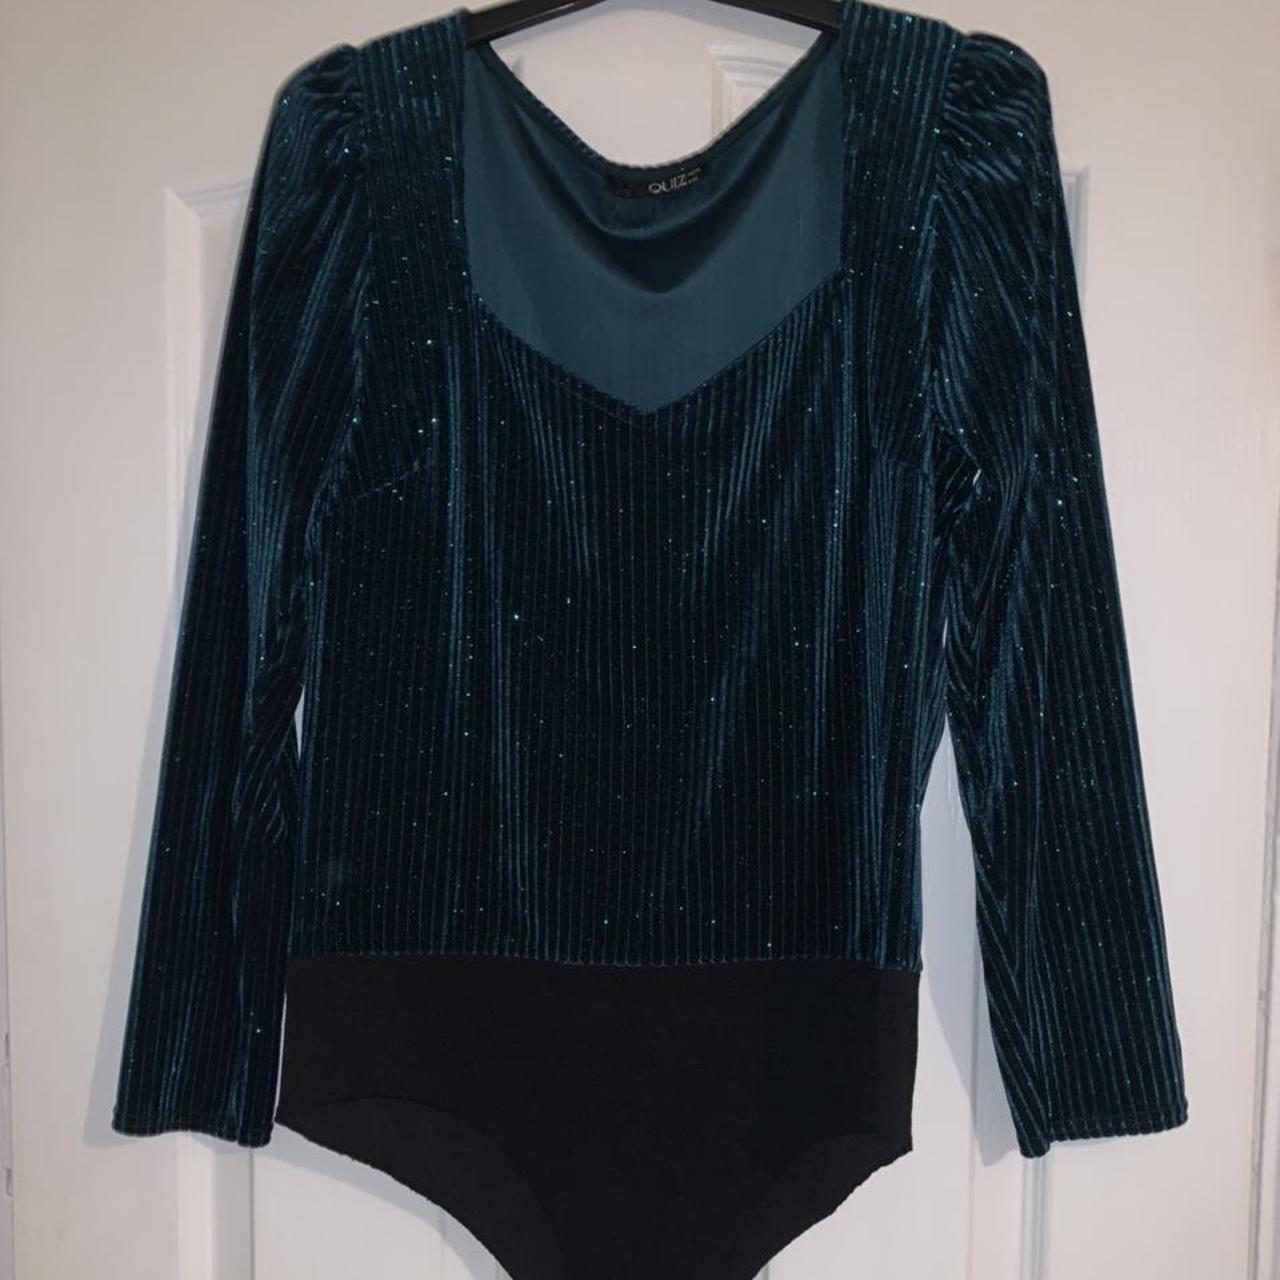 This quiz bodysuit only been worn once perfect for a... - Depop